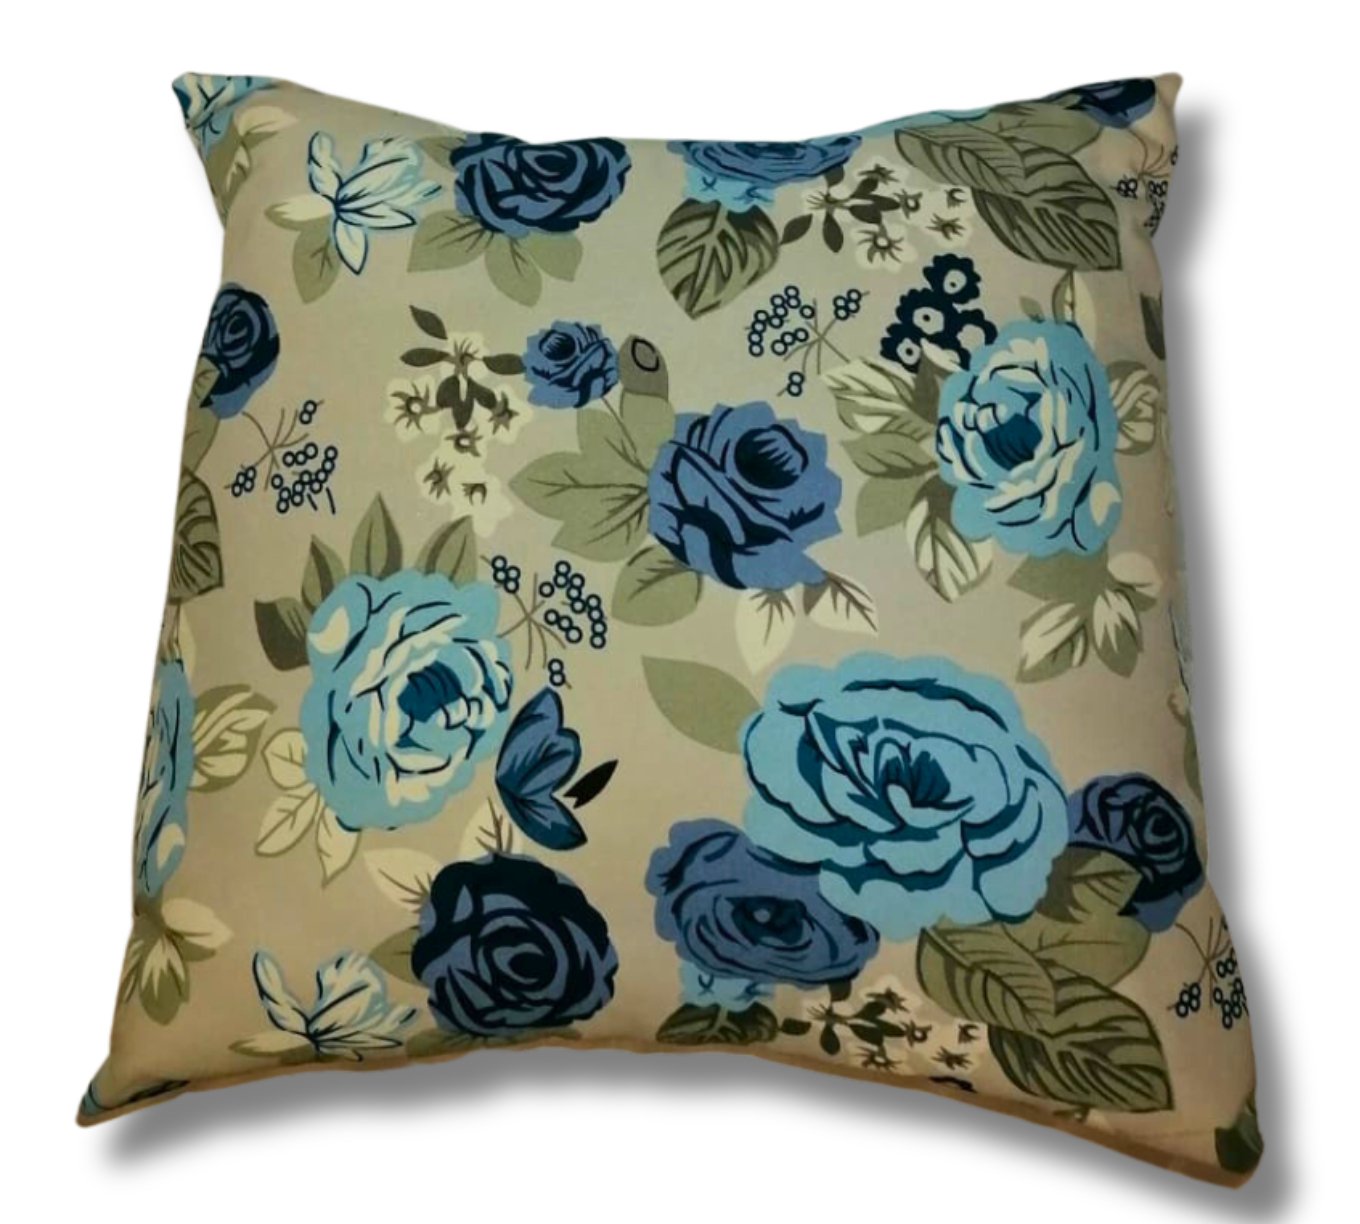 Decorative Cushions 40*40cm - That Couch Place